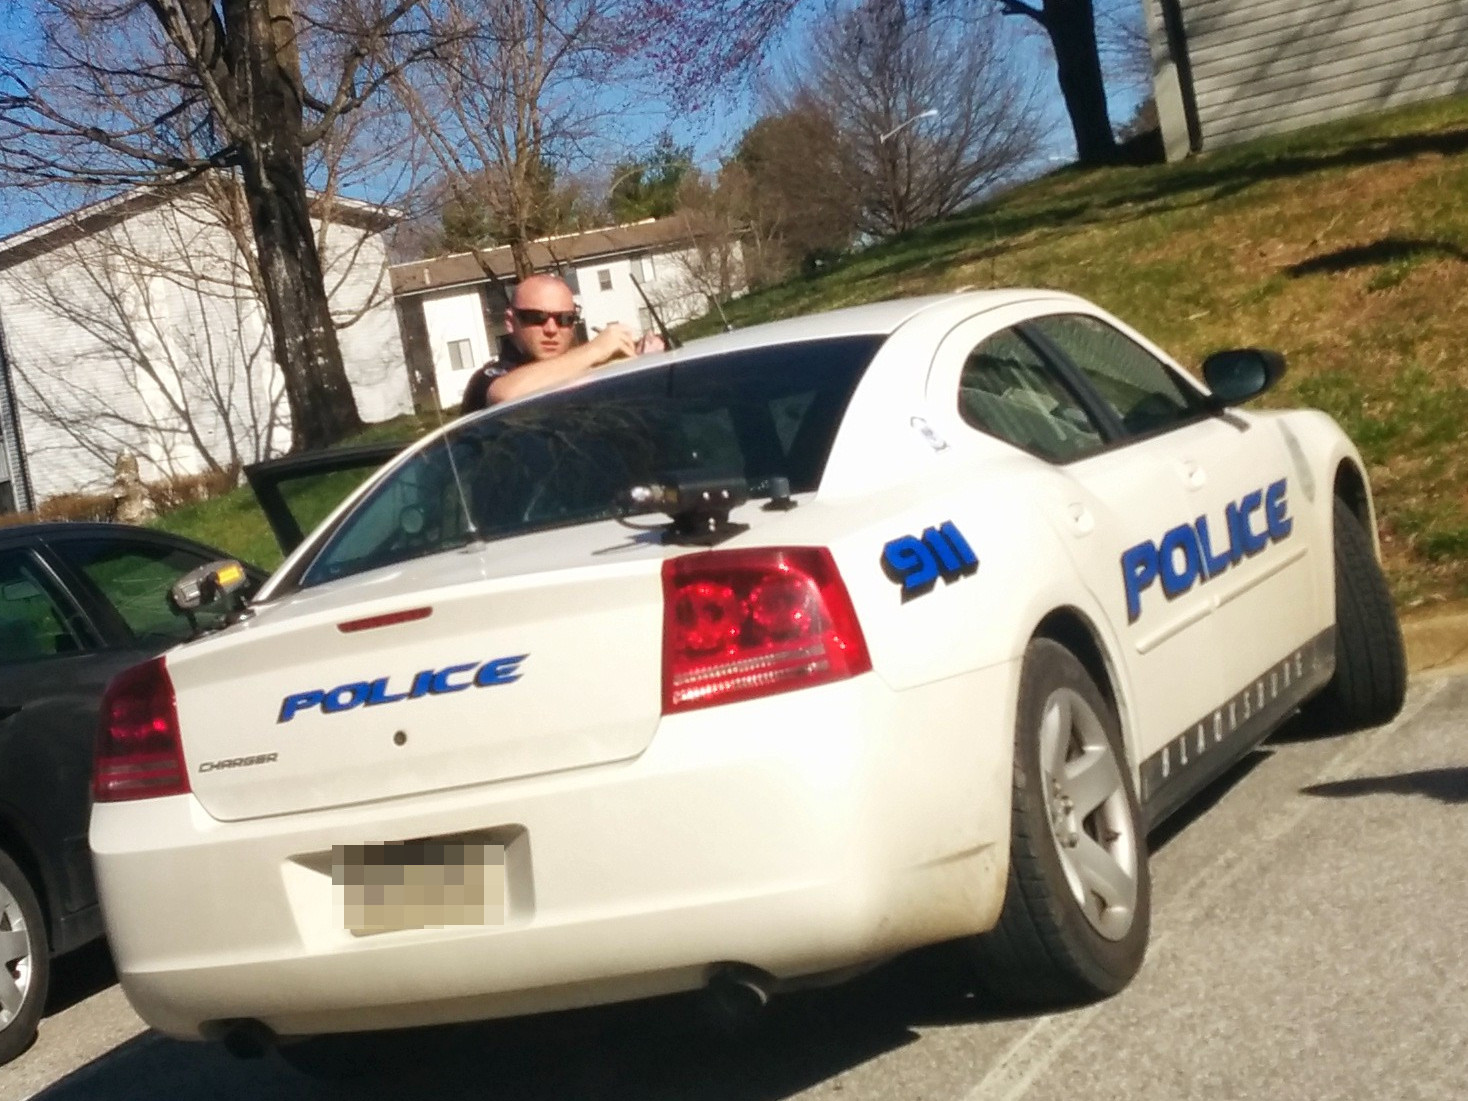 Blacksburg PD vehicle equipped with ALPR